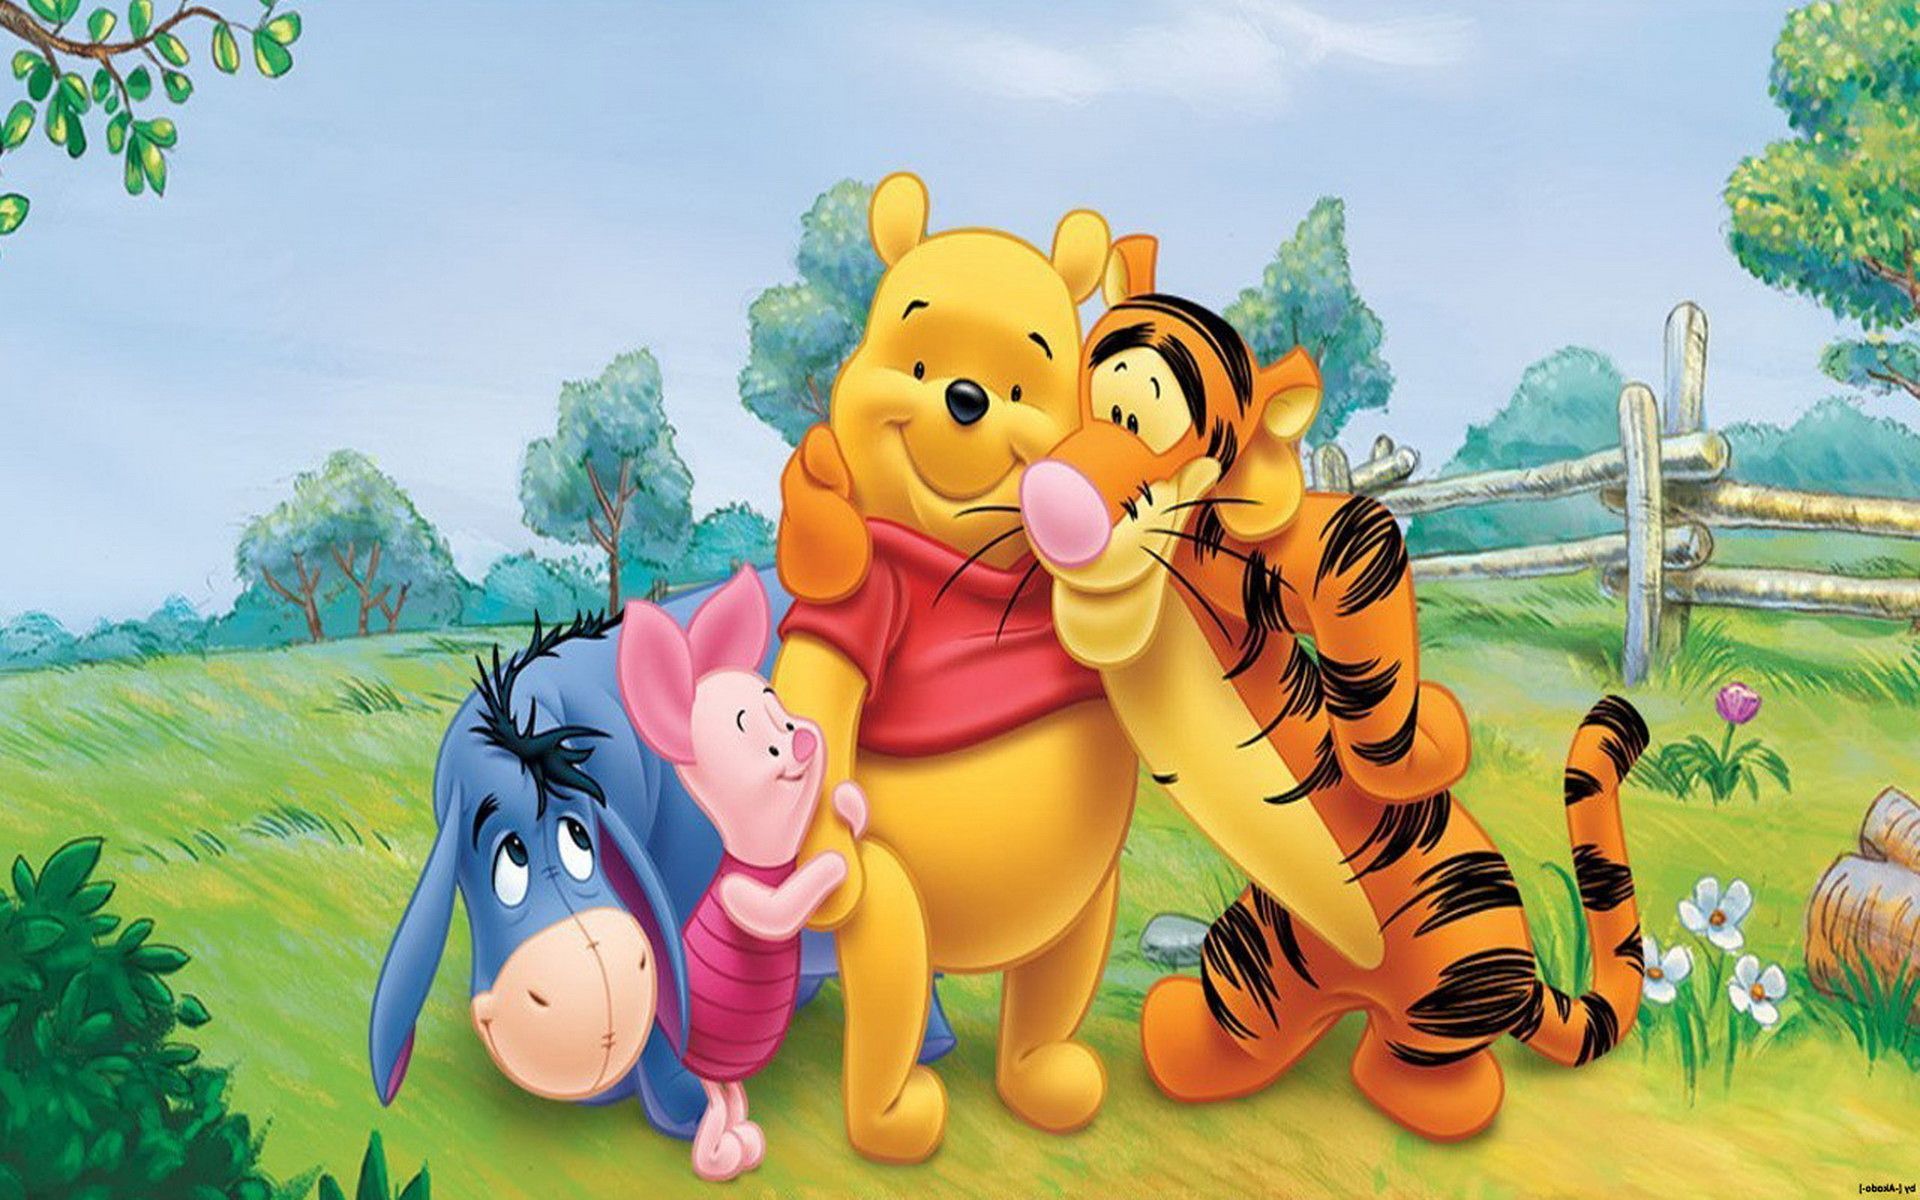 Winnie The Pooh wallpapers HD  Download Free backgrounds